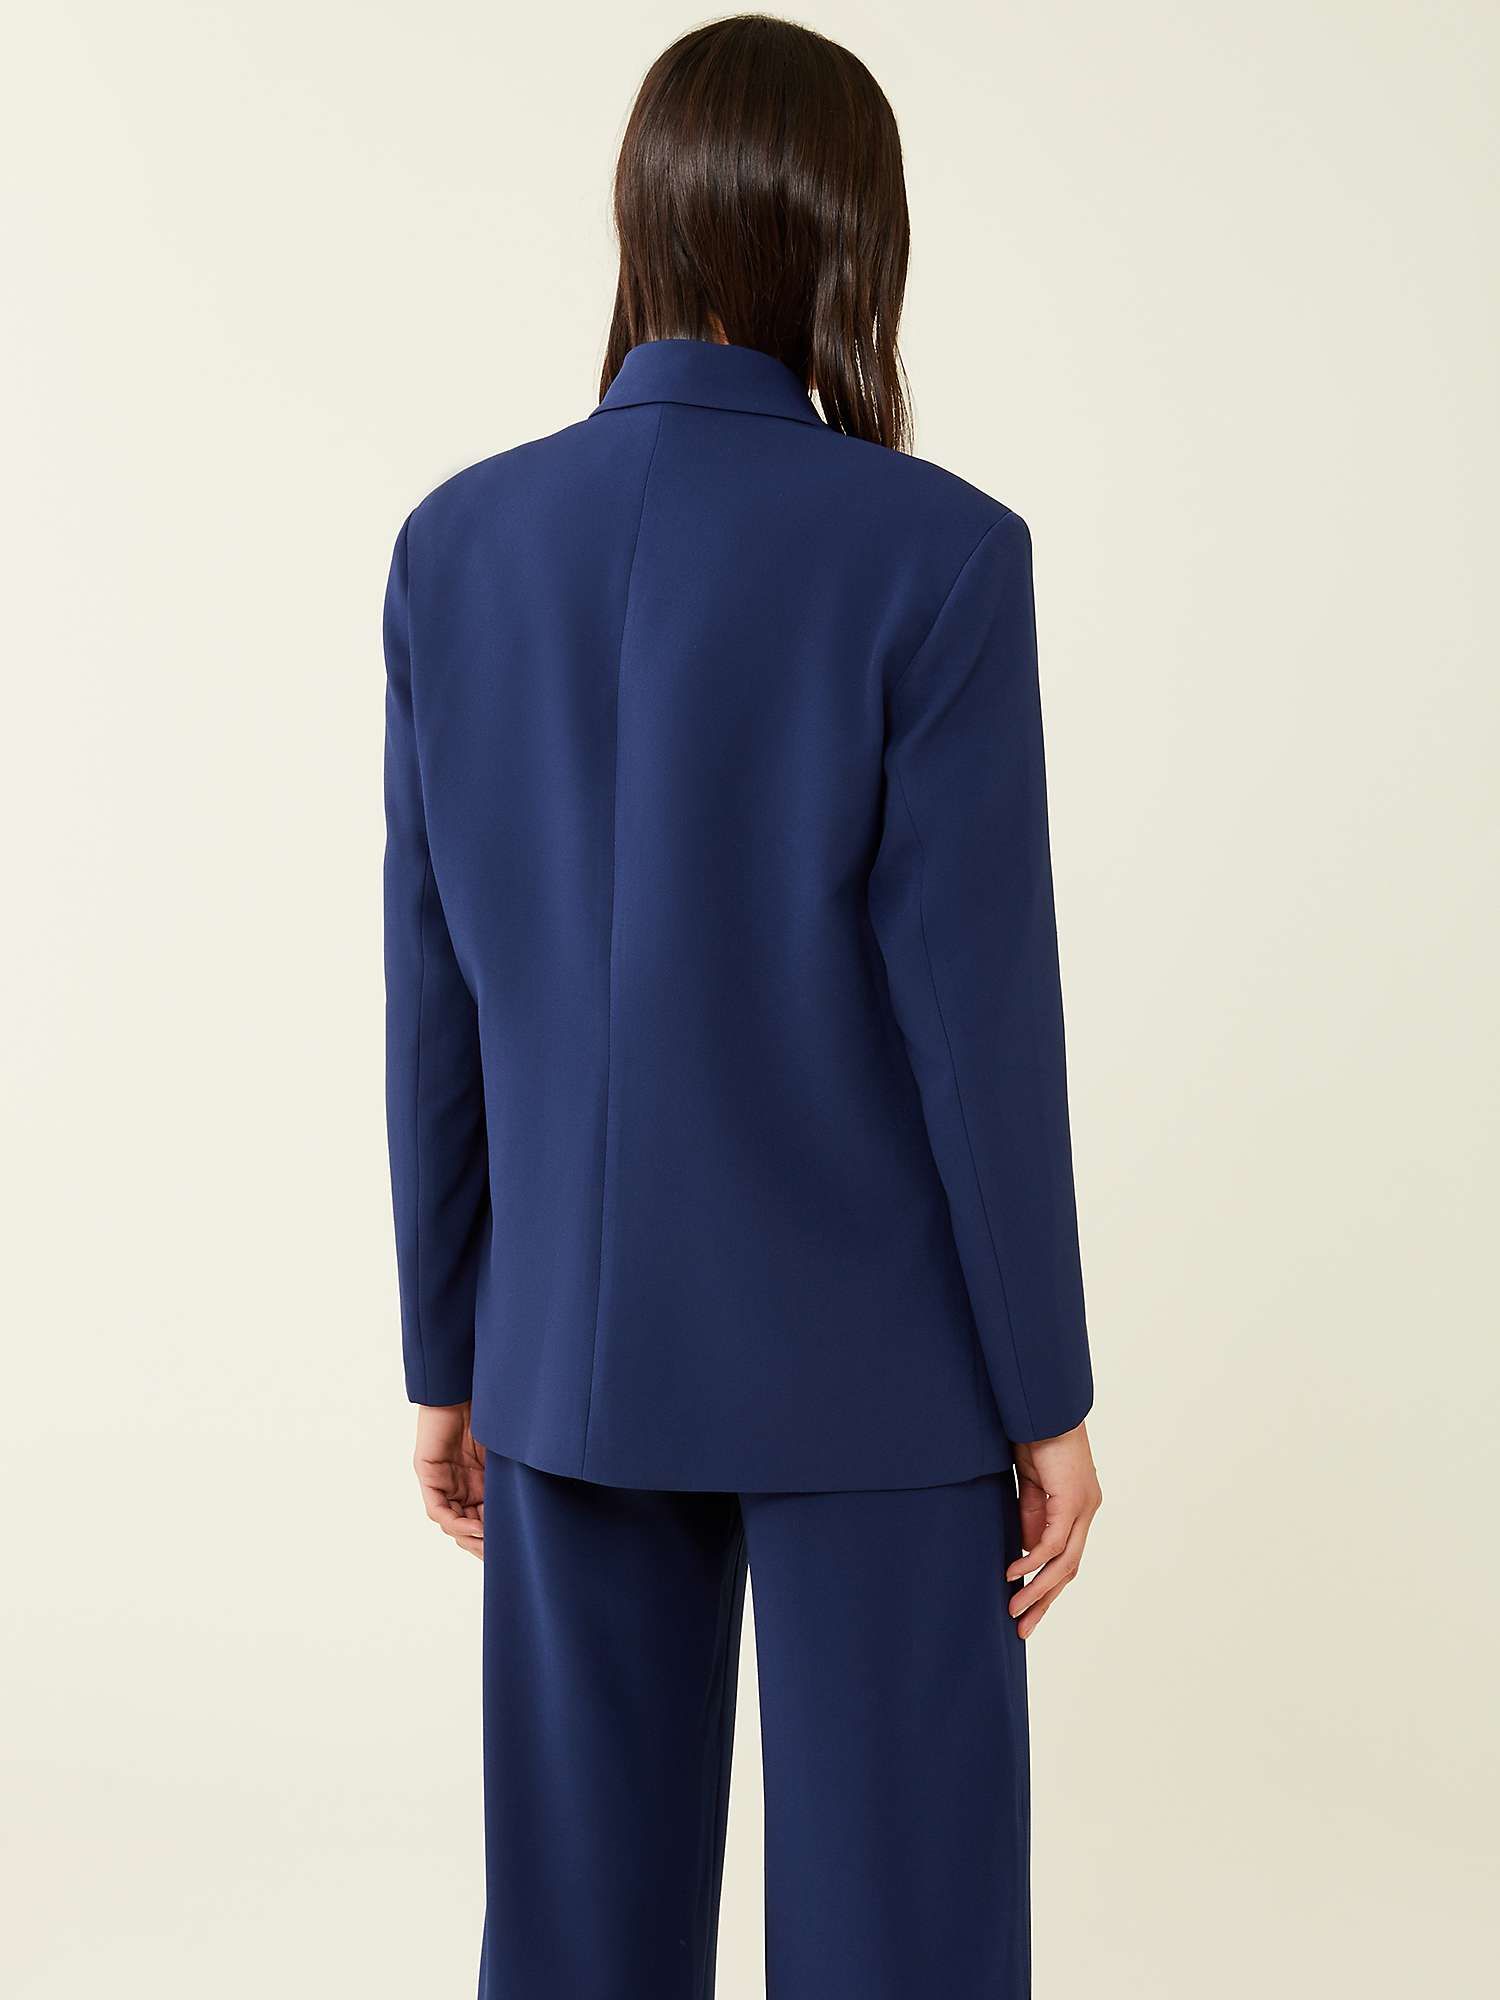 Finery Maeve Double Breasted Blazer, Navy at John Lewis & Partners